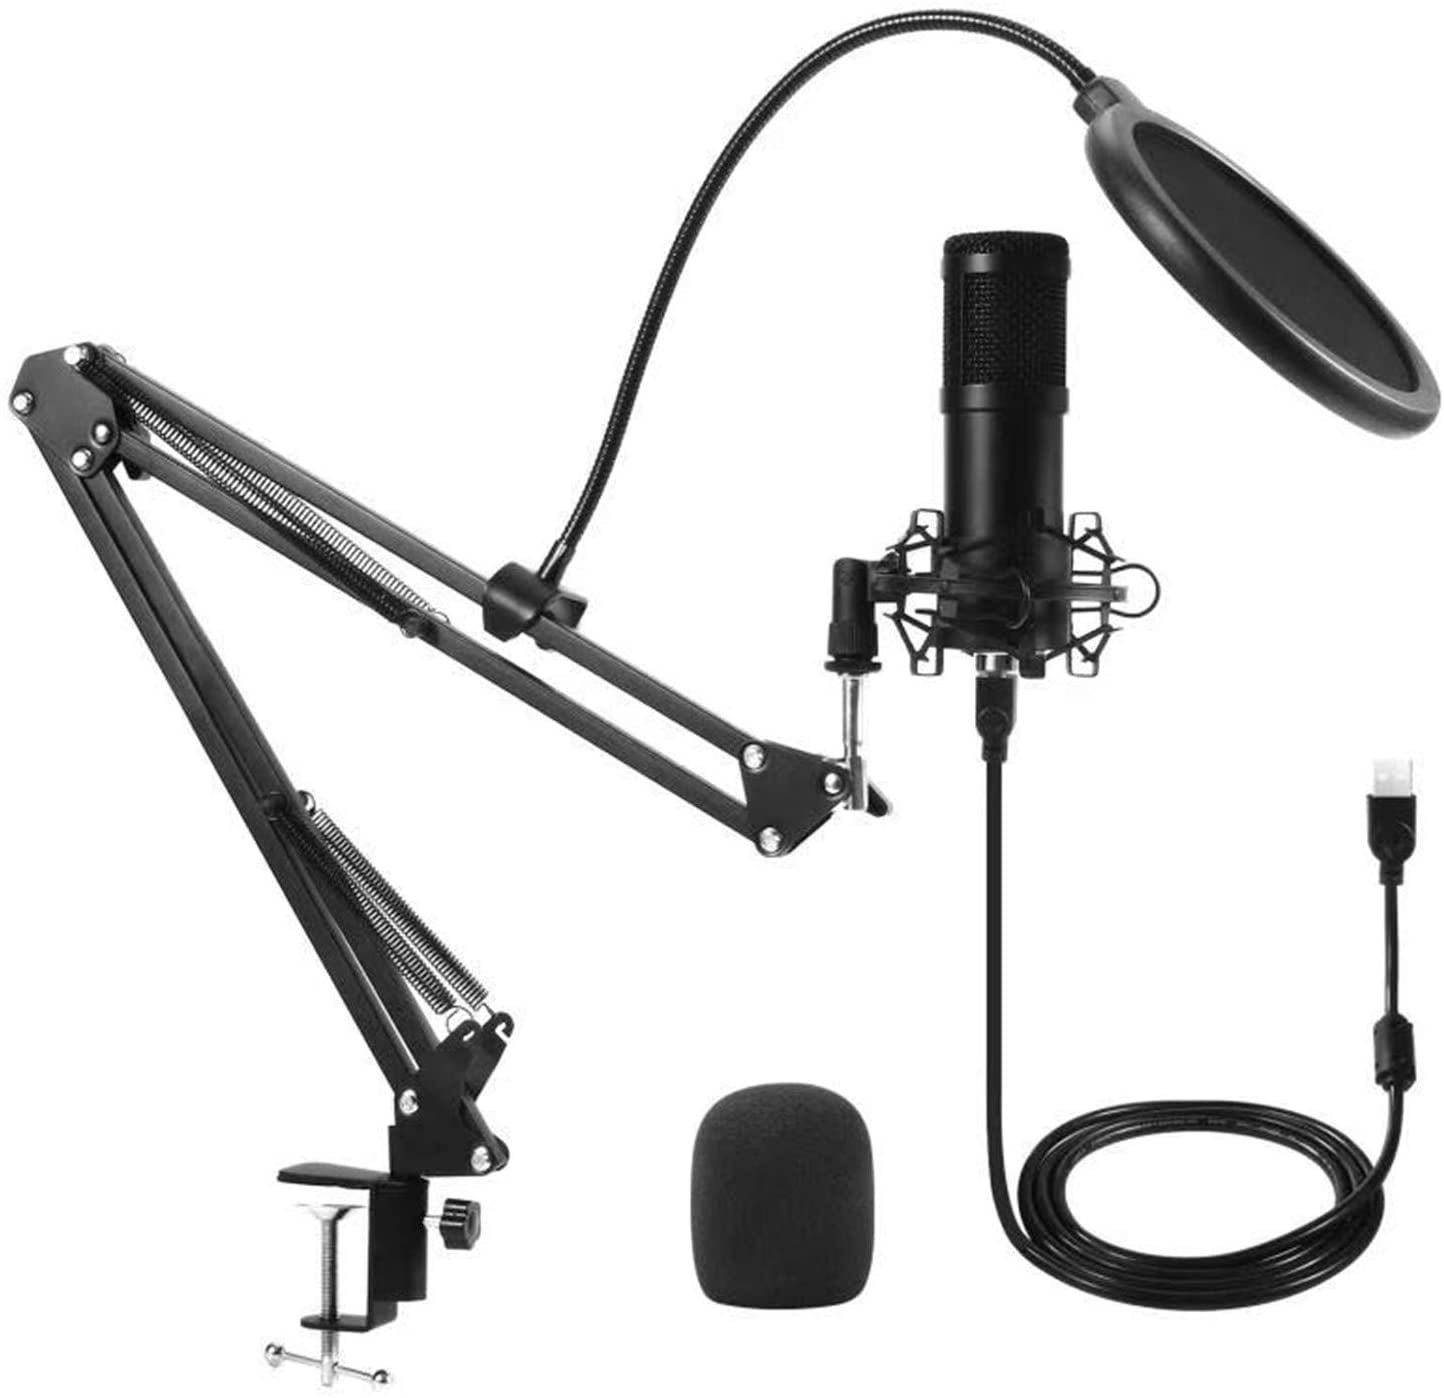 USB Gaming Microphone Set with Flexible Arm Filter Live Streaming Studio for PC Black 